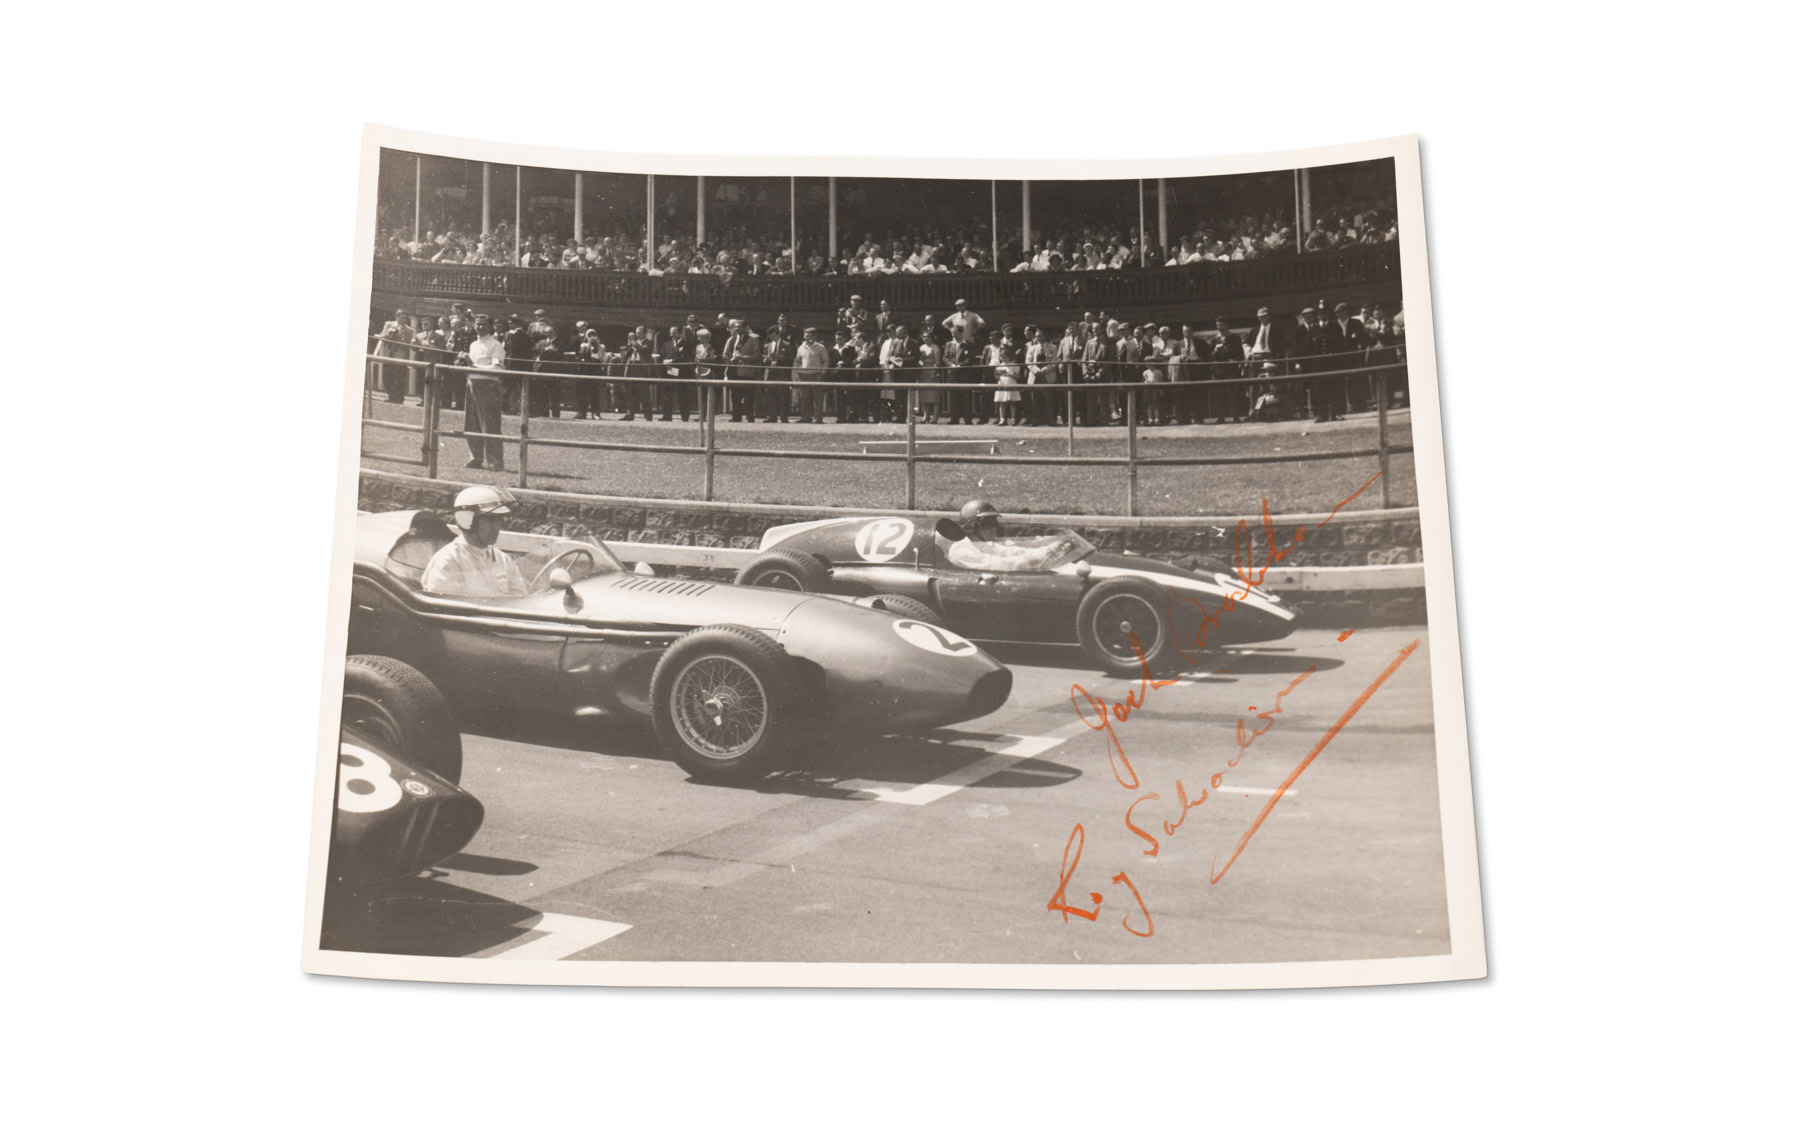 Photograph Signed by Roy Salvadori and Jack Brabham